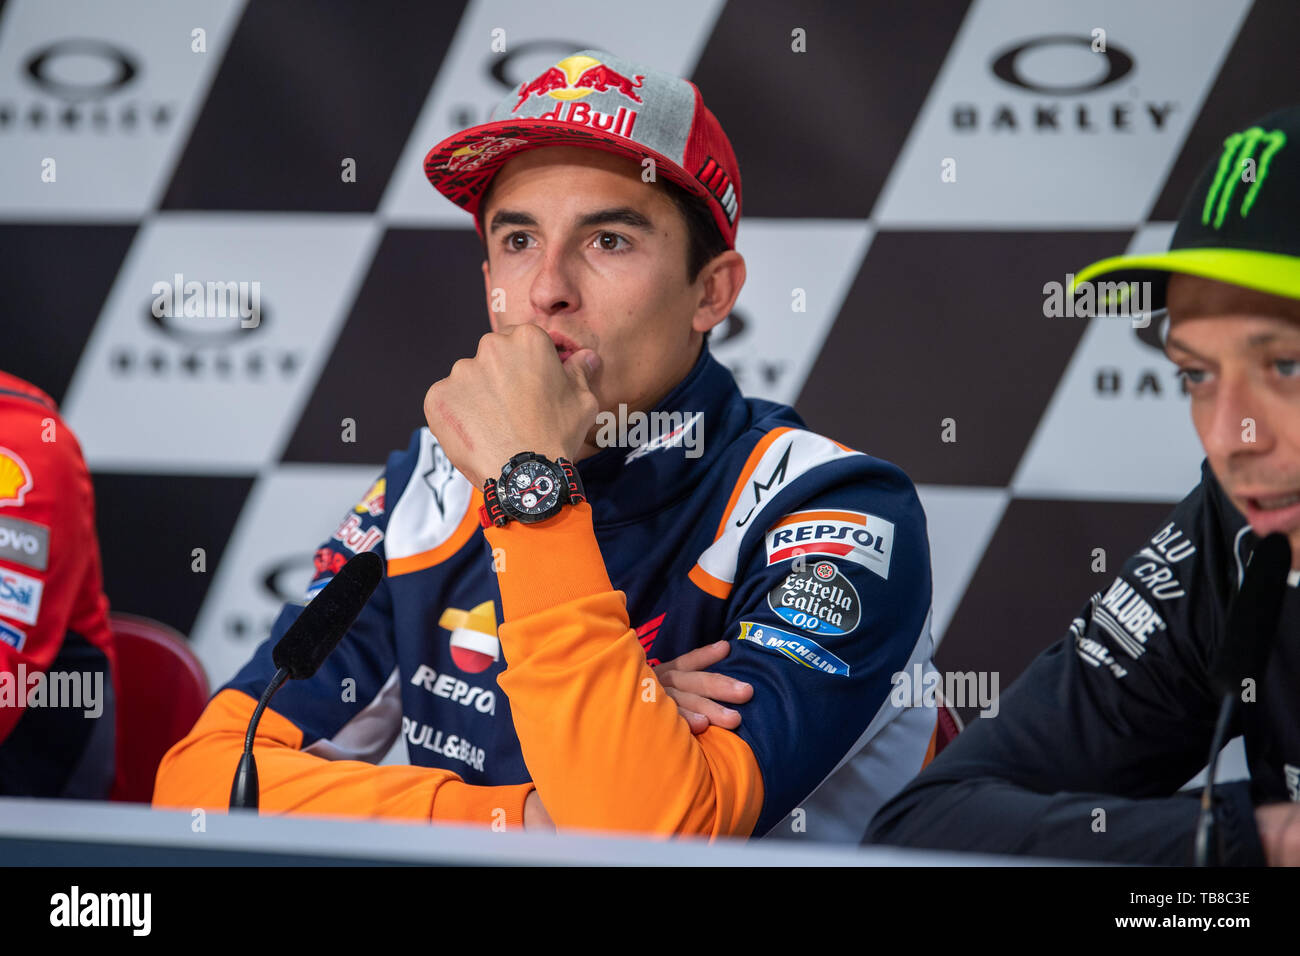 Mugello, Italy. 30th May, 2019. Marc Marquez during the MotoGP Press  Conference GRAN PREMIO D'ITALIA 'OAKLEY' 30 May 2019 Credit: Independent  Photo Agency/Alamy Live News Stock Photo - Alamy